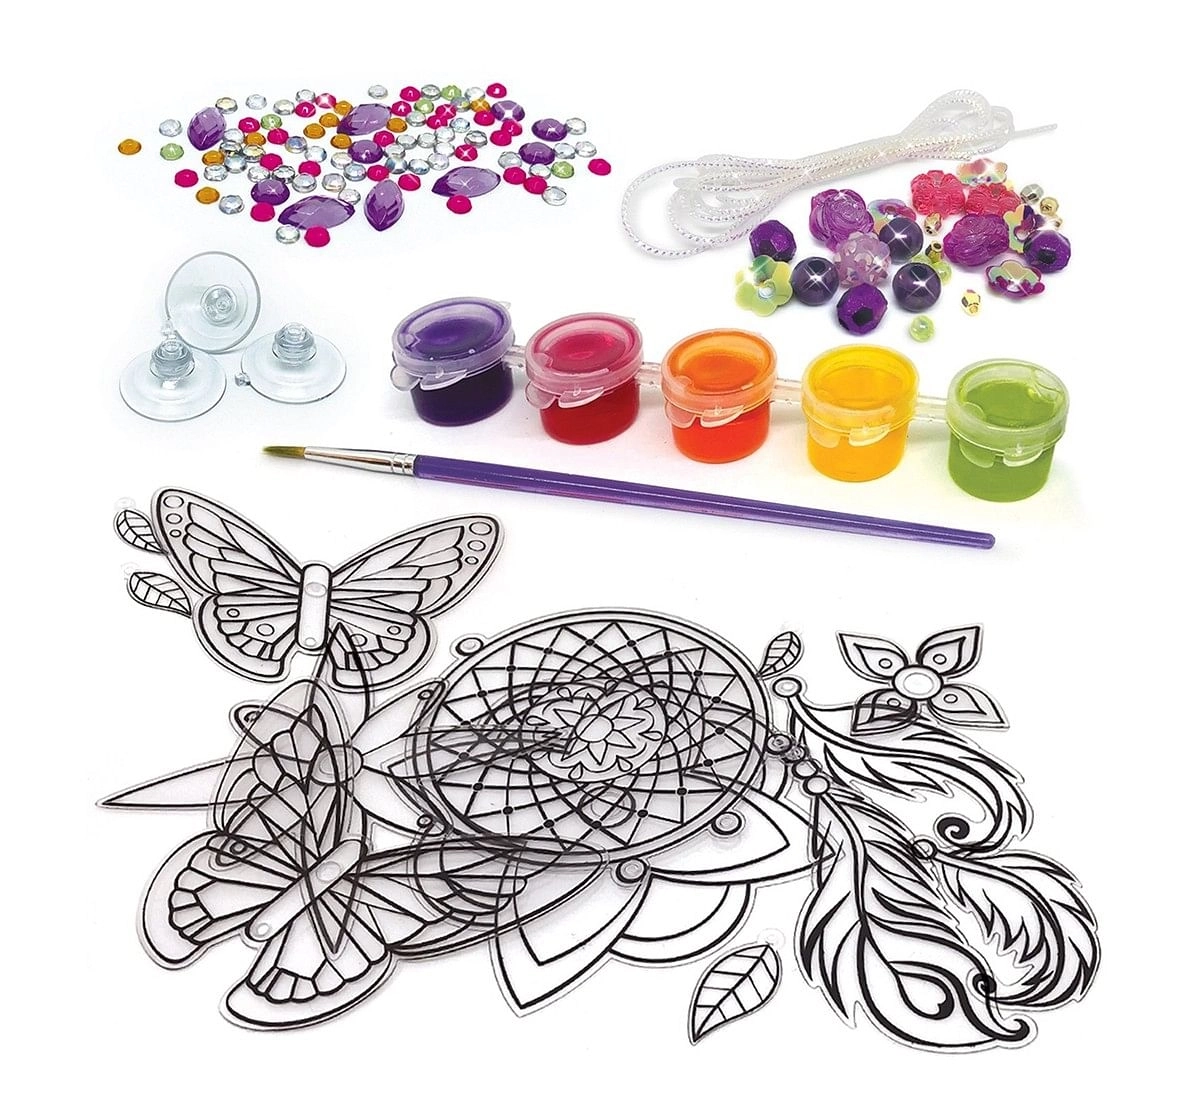 Nebulous Star - Window Charms DIY Art & Craft Kits for age 7Y+ 